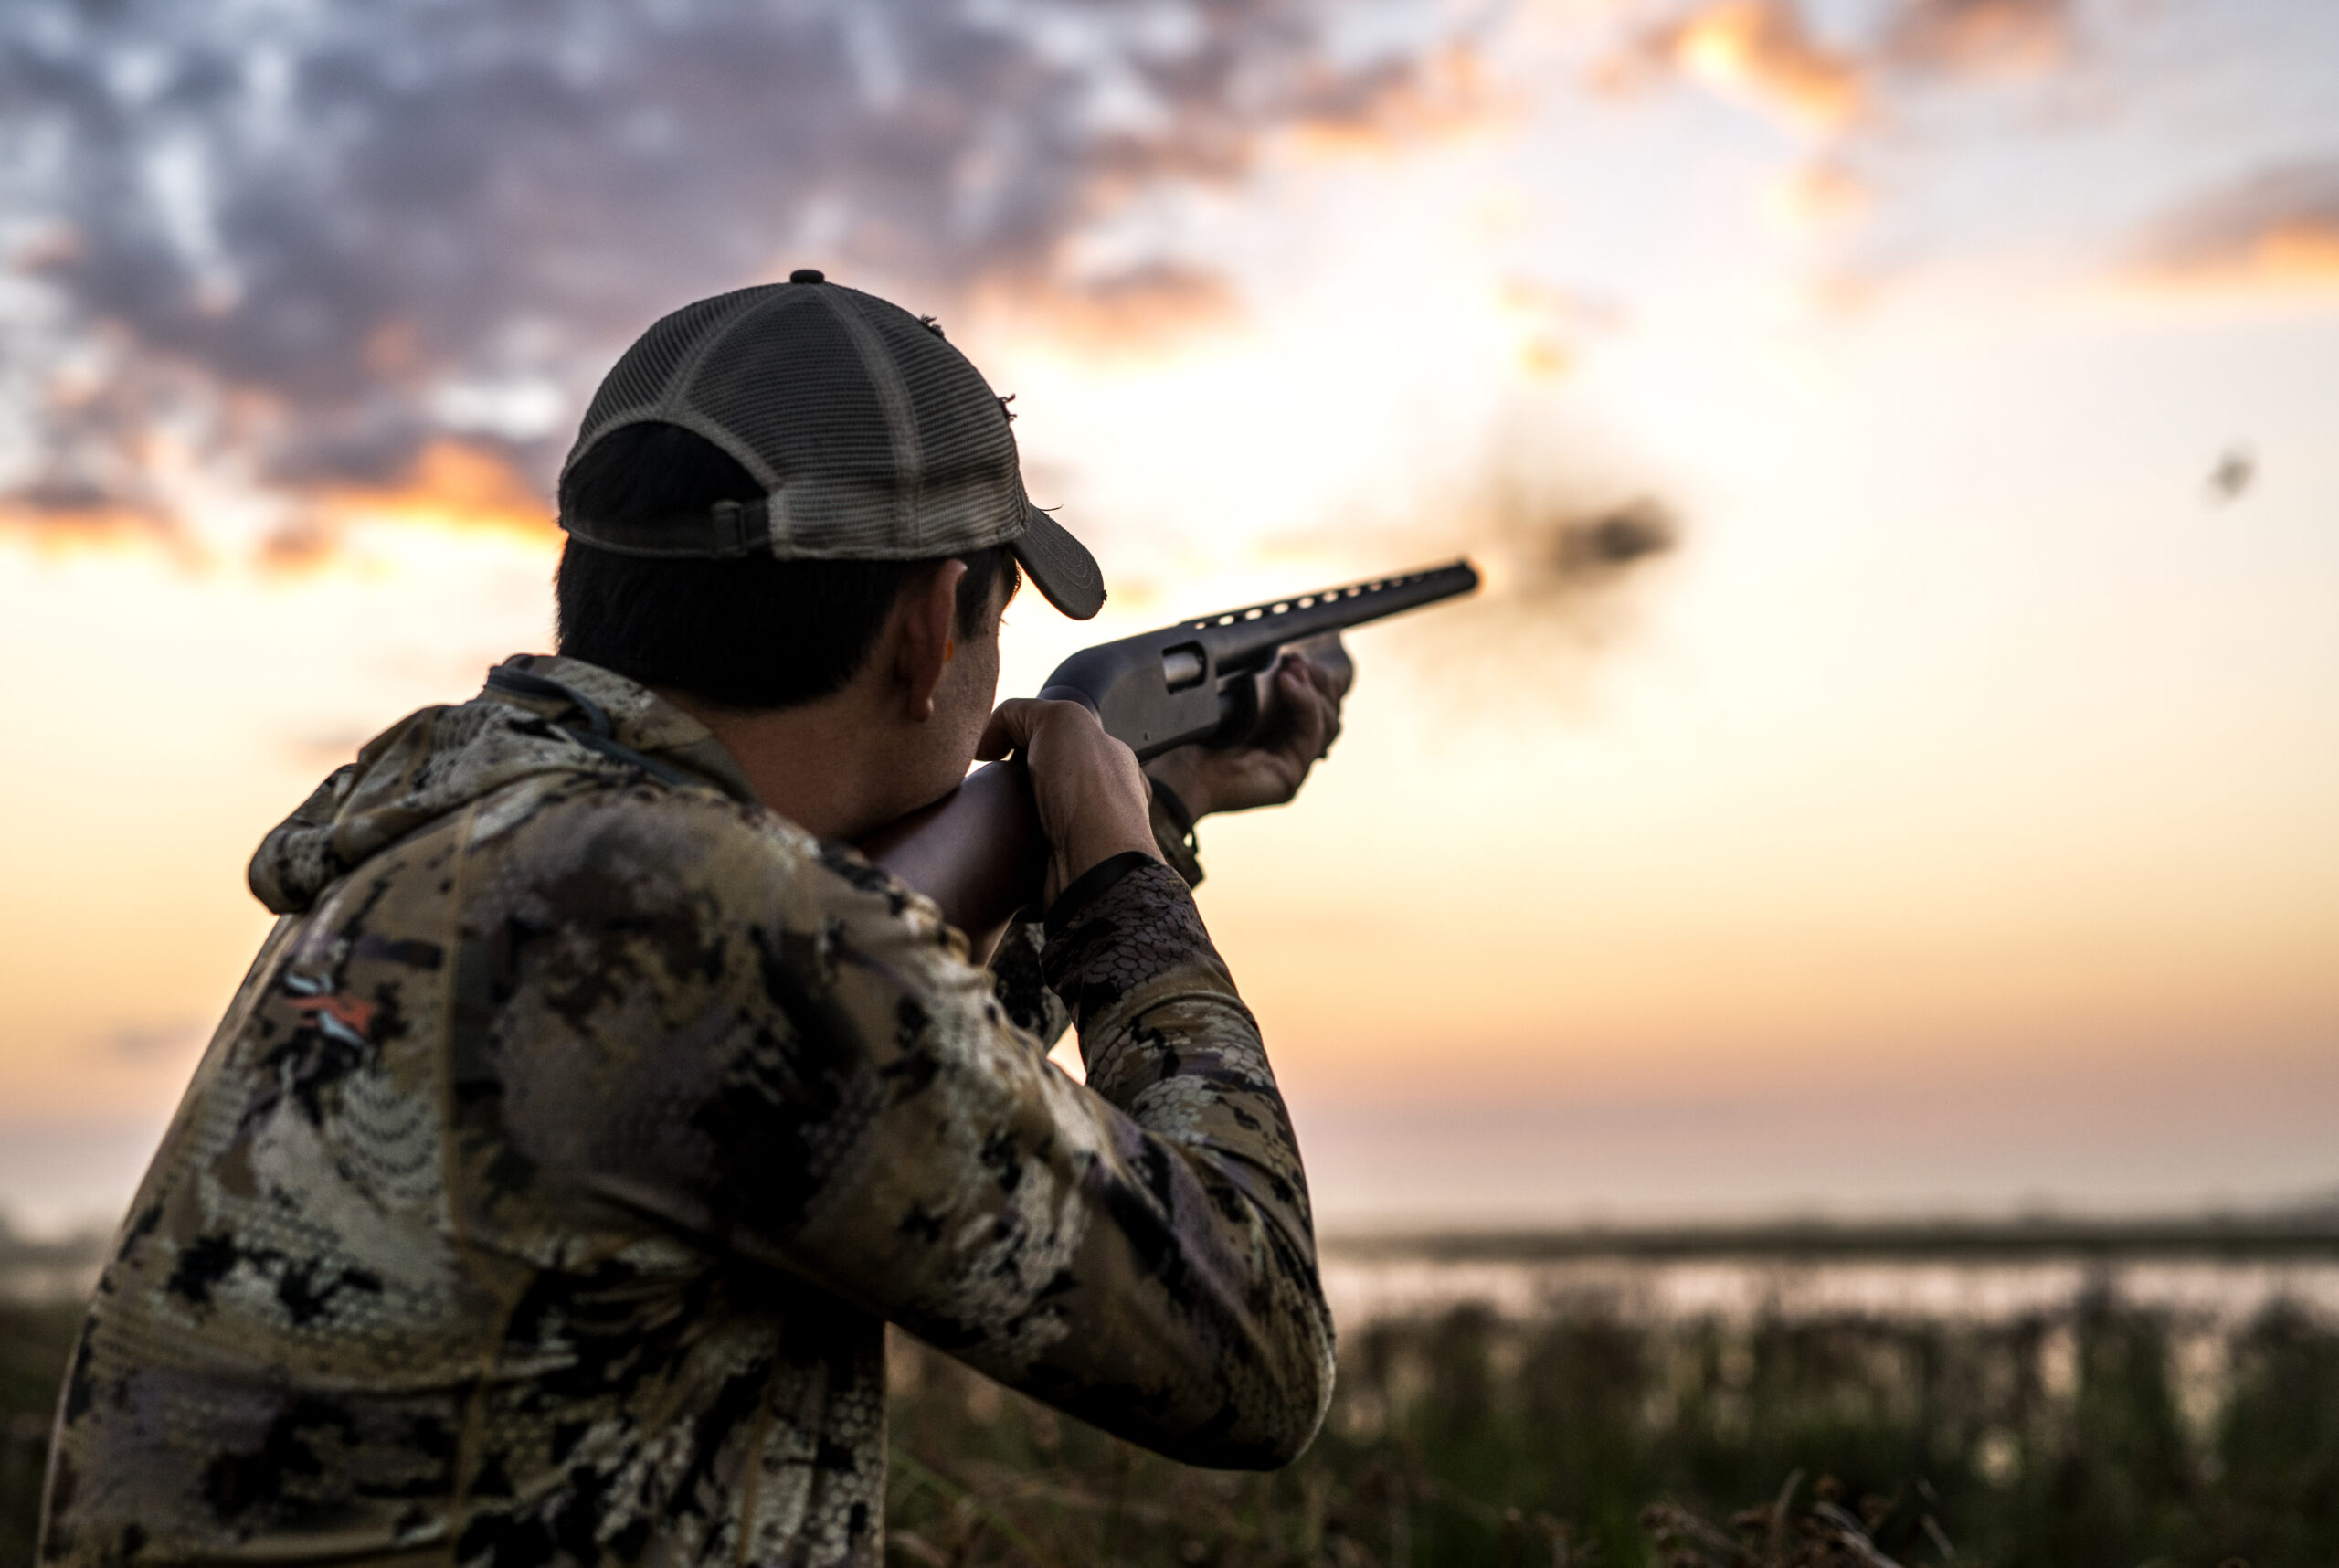 The Best Duck Hunting Shotguns for Waterfowlers